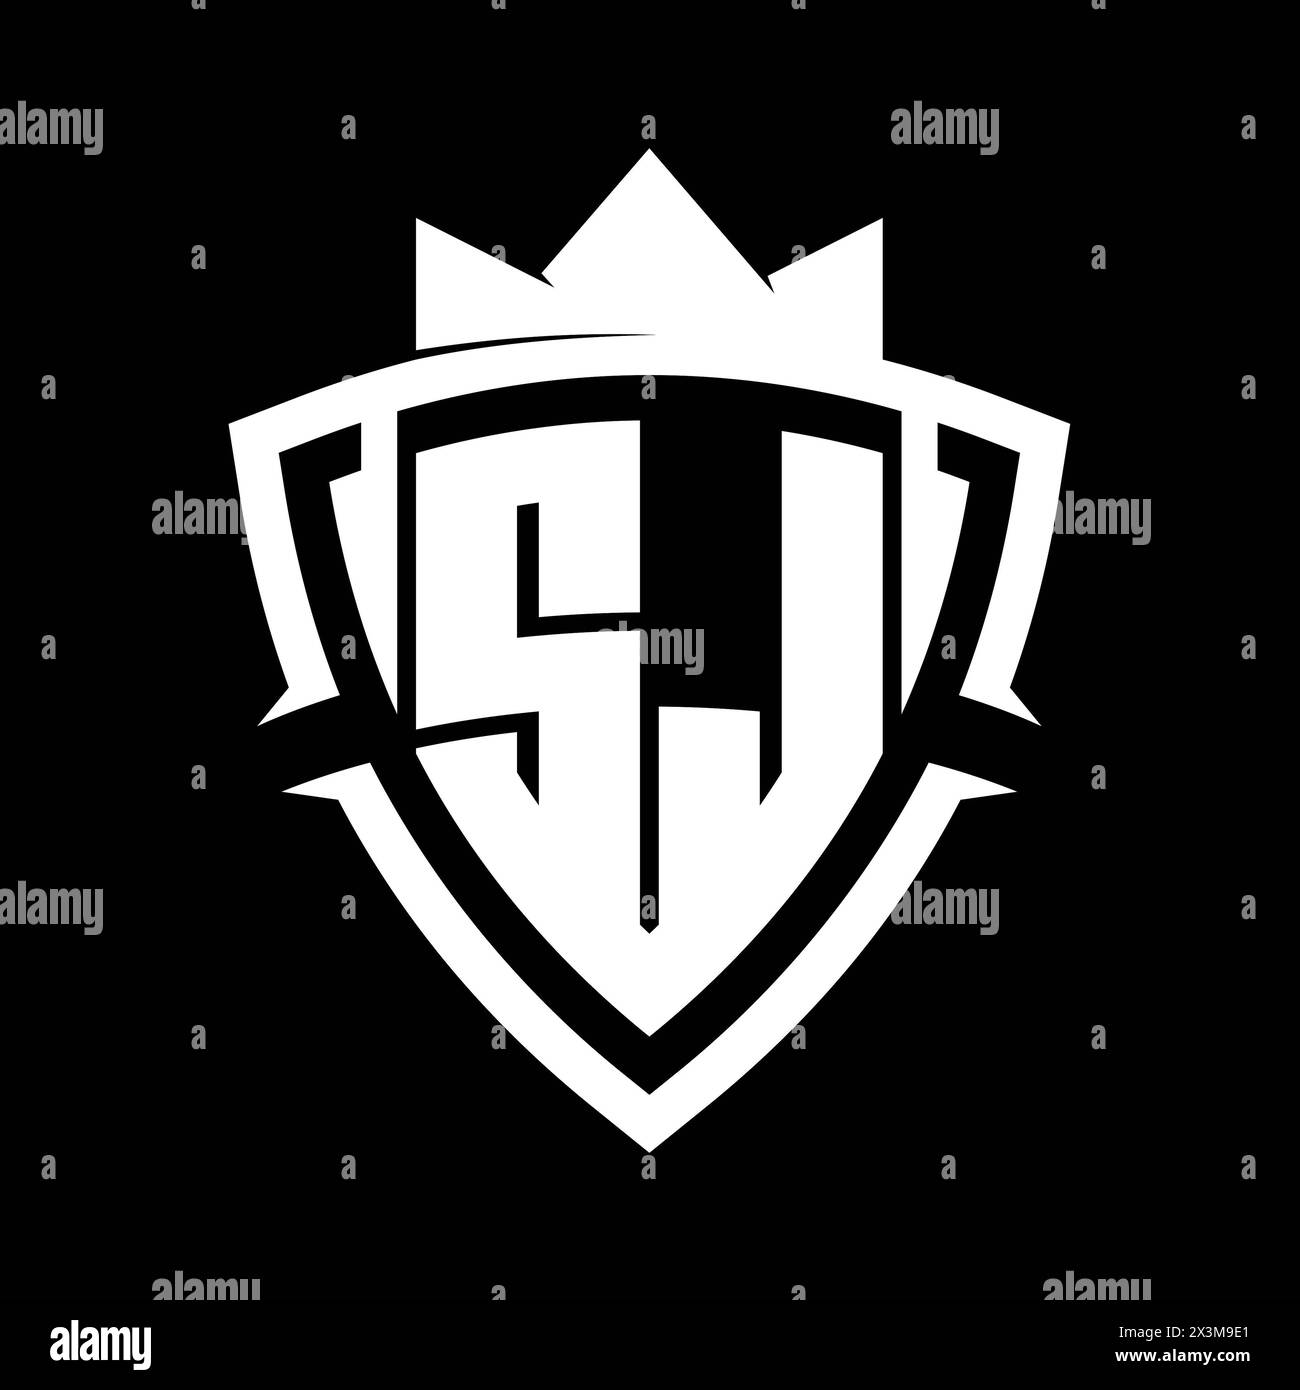 SJ Letter bold monogram with triangle curve shield shape with crown white and black background color design template Stock Photo